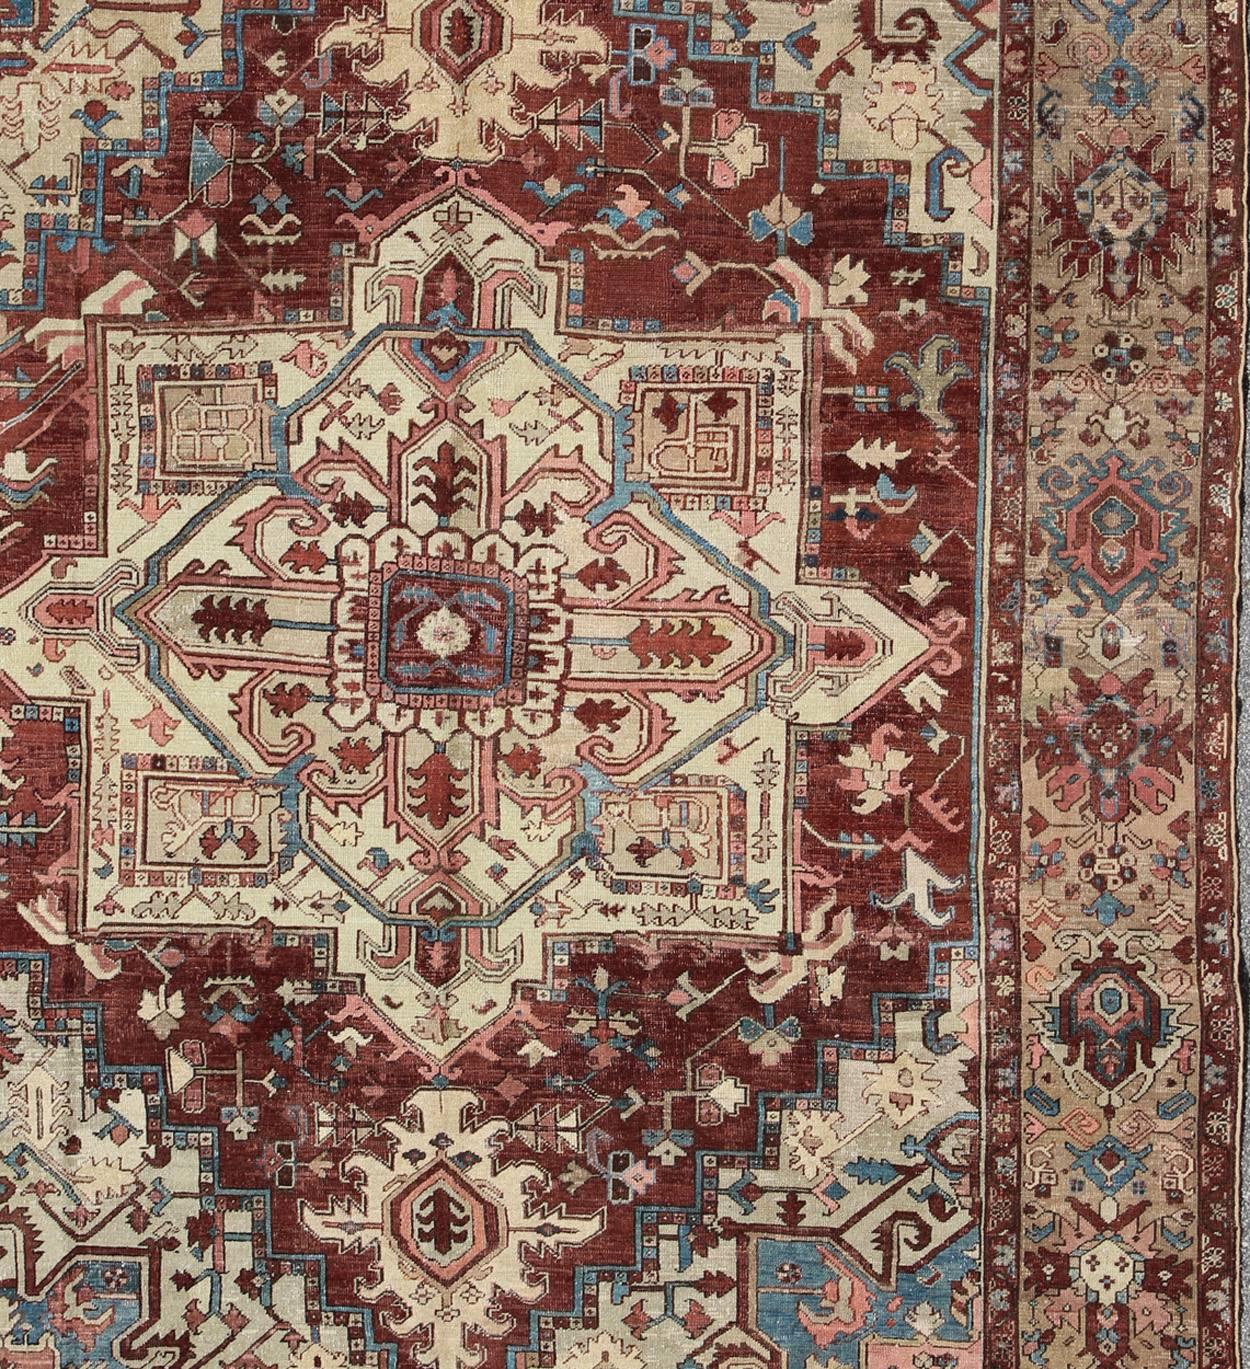 Antique Persian Serapi Carpet With Medallion In Reddish Brown Tan and Light Blue In Good Condition For Sale In Atlanta, GA